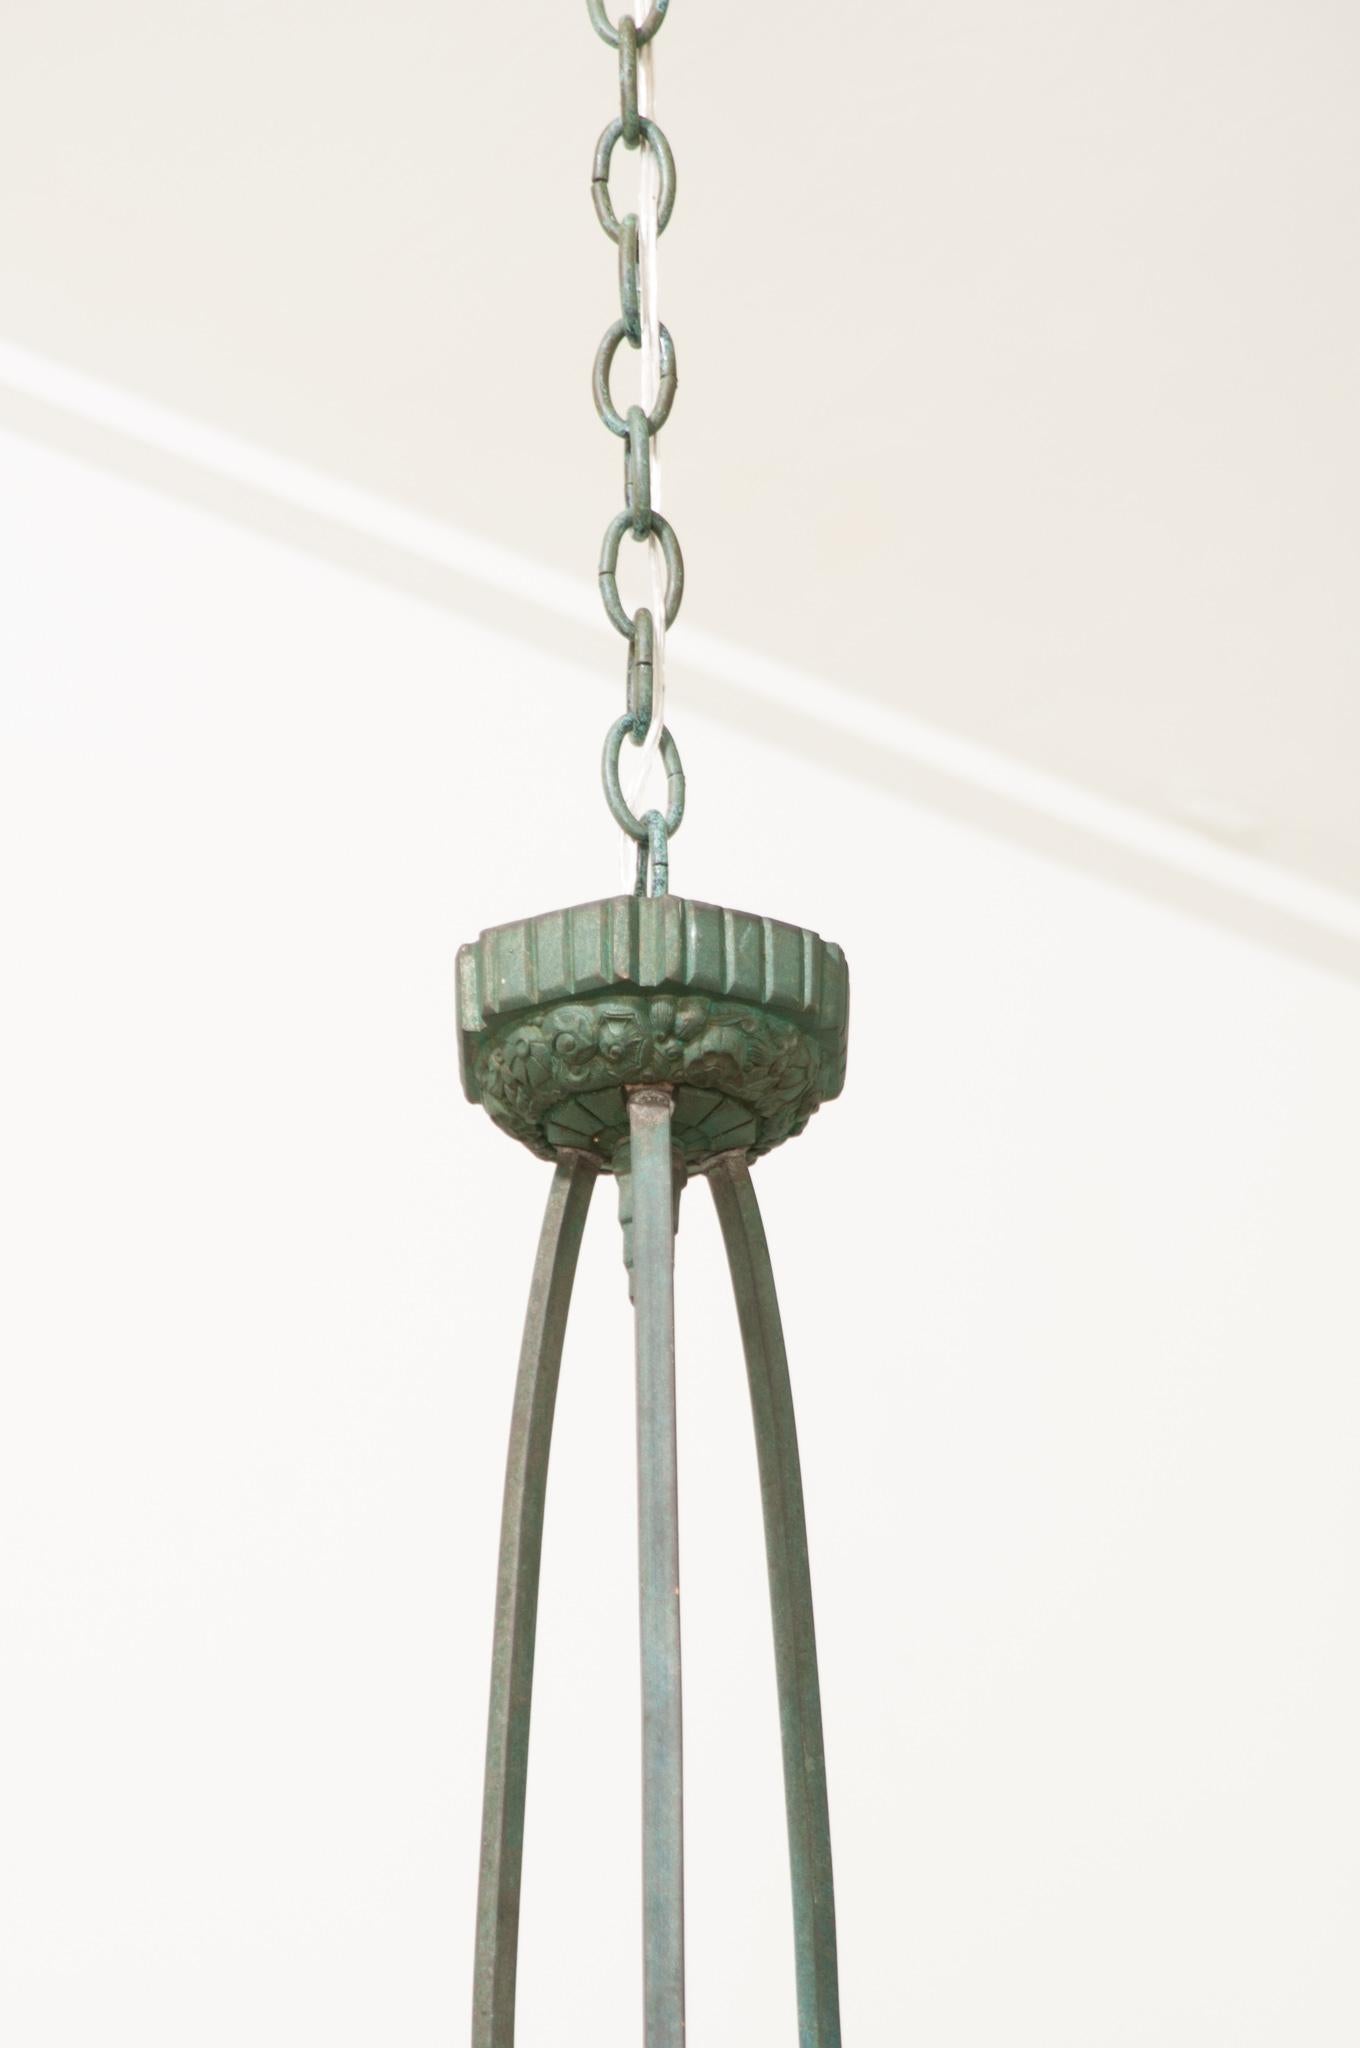 French 20th Century Art Deco Chandelier In Good Condition For Sale In Baton Rouge, LA